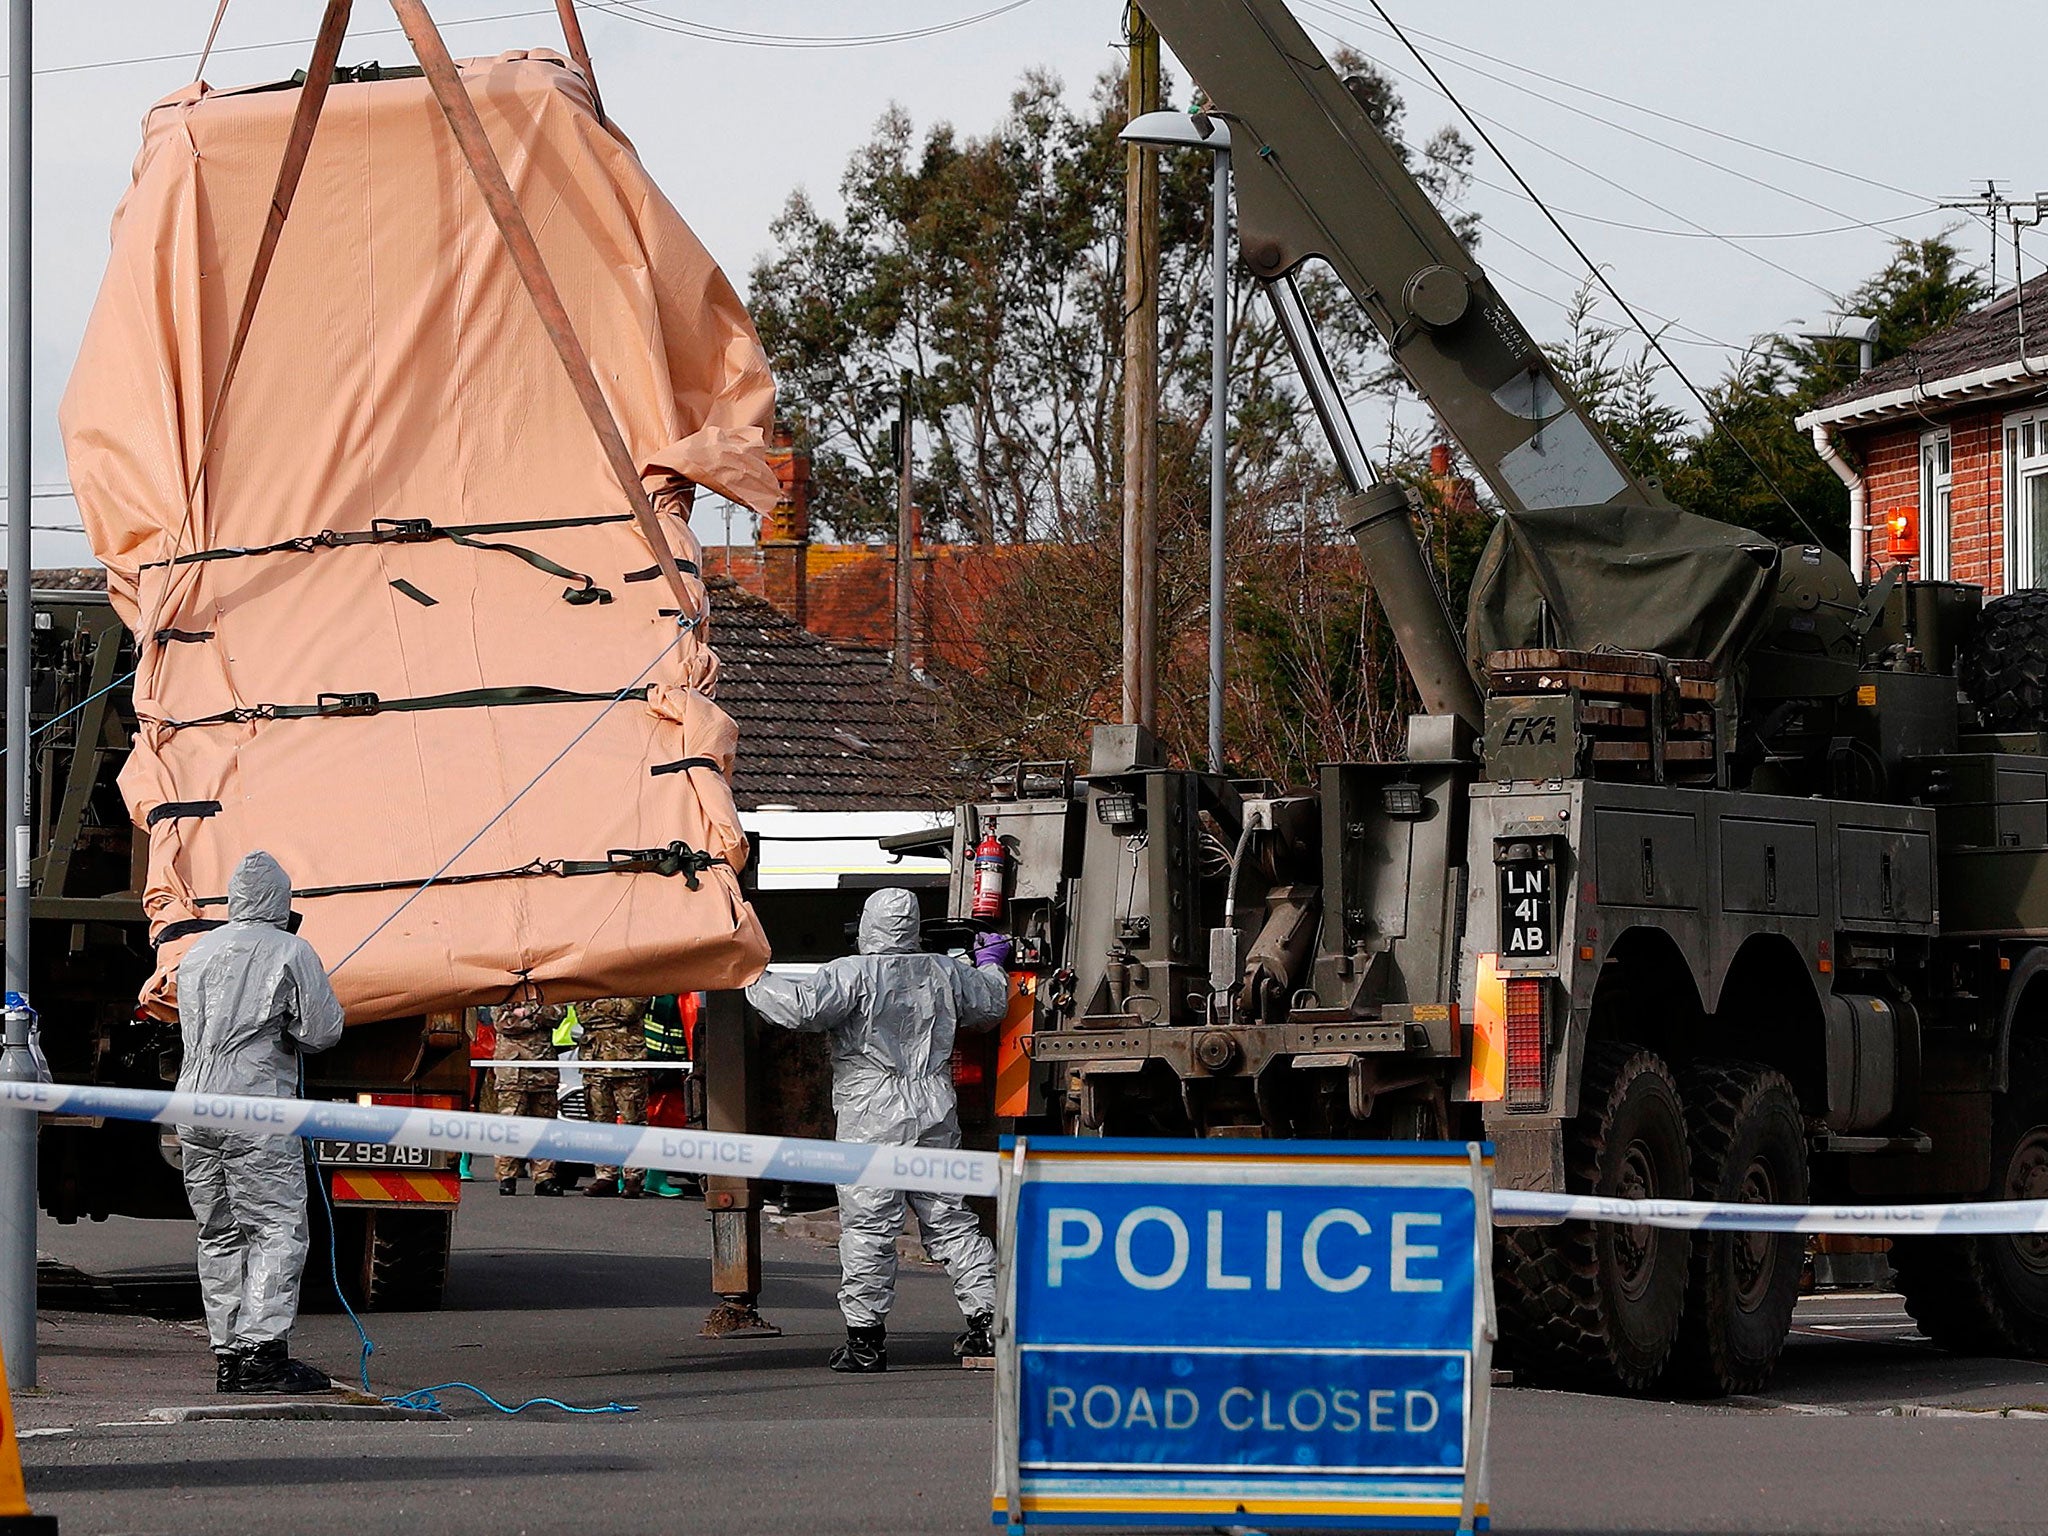 Soldiers wearing protective clothing load a recovery lorry onto an Army vehicle in Gillingham, Dorset, as part of the investigation into the nerve agent attack on the Russian double agent